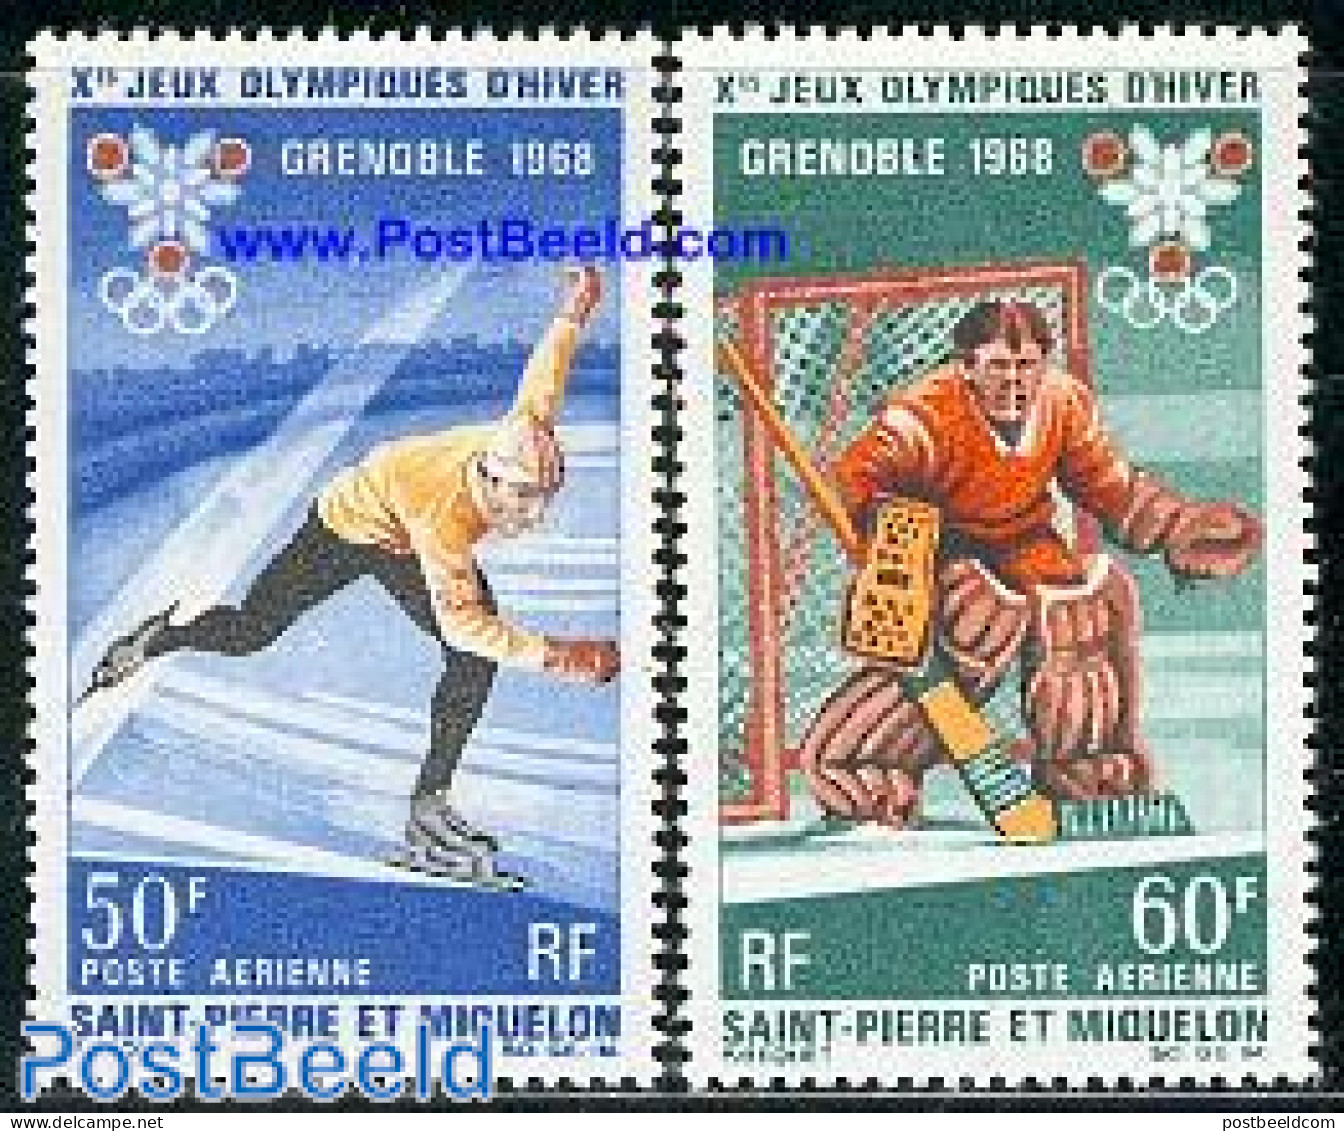 Saint Pierre And Miquelon 1968 Olympic Winter Games 2v, Mint NH, Sport - Ice Hockey - Olympic Winter Games - Skating - Eishockey